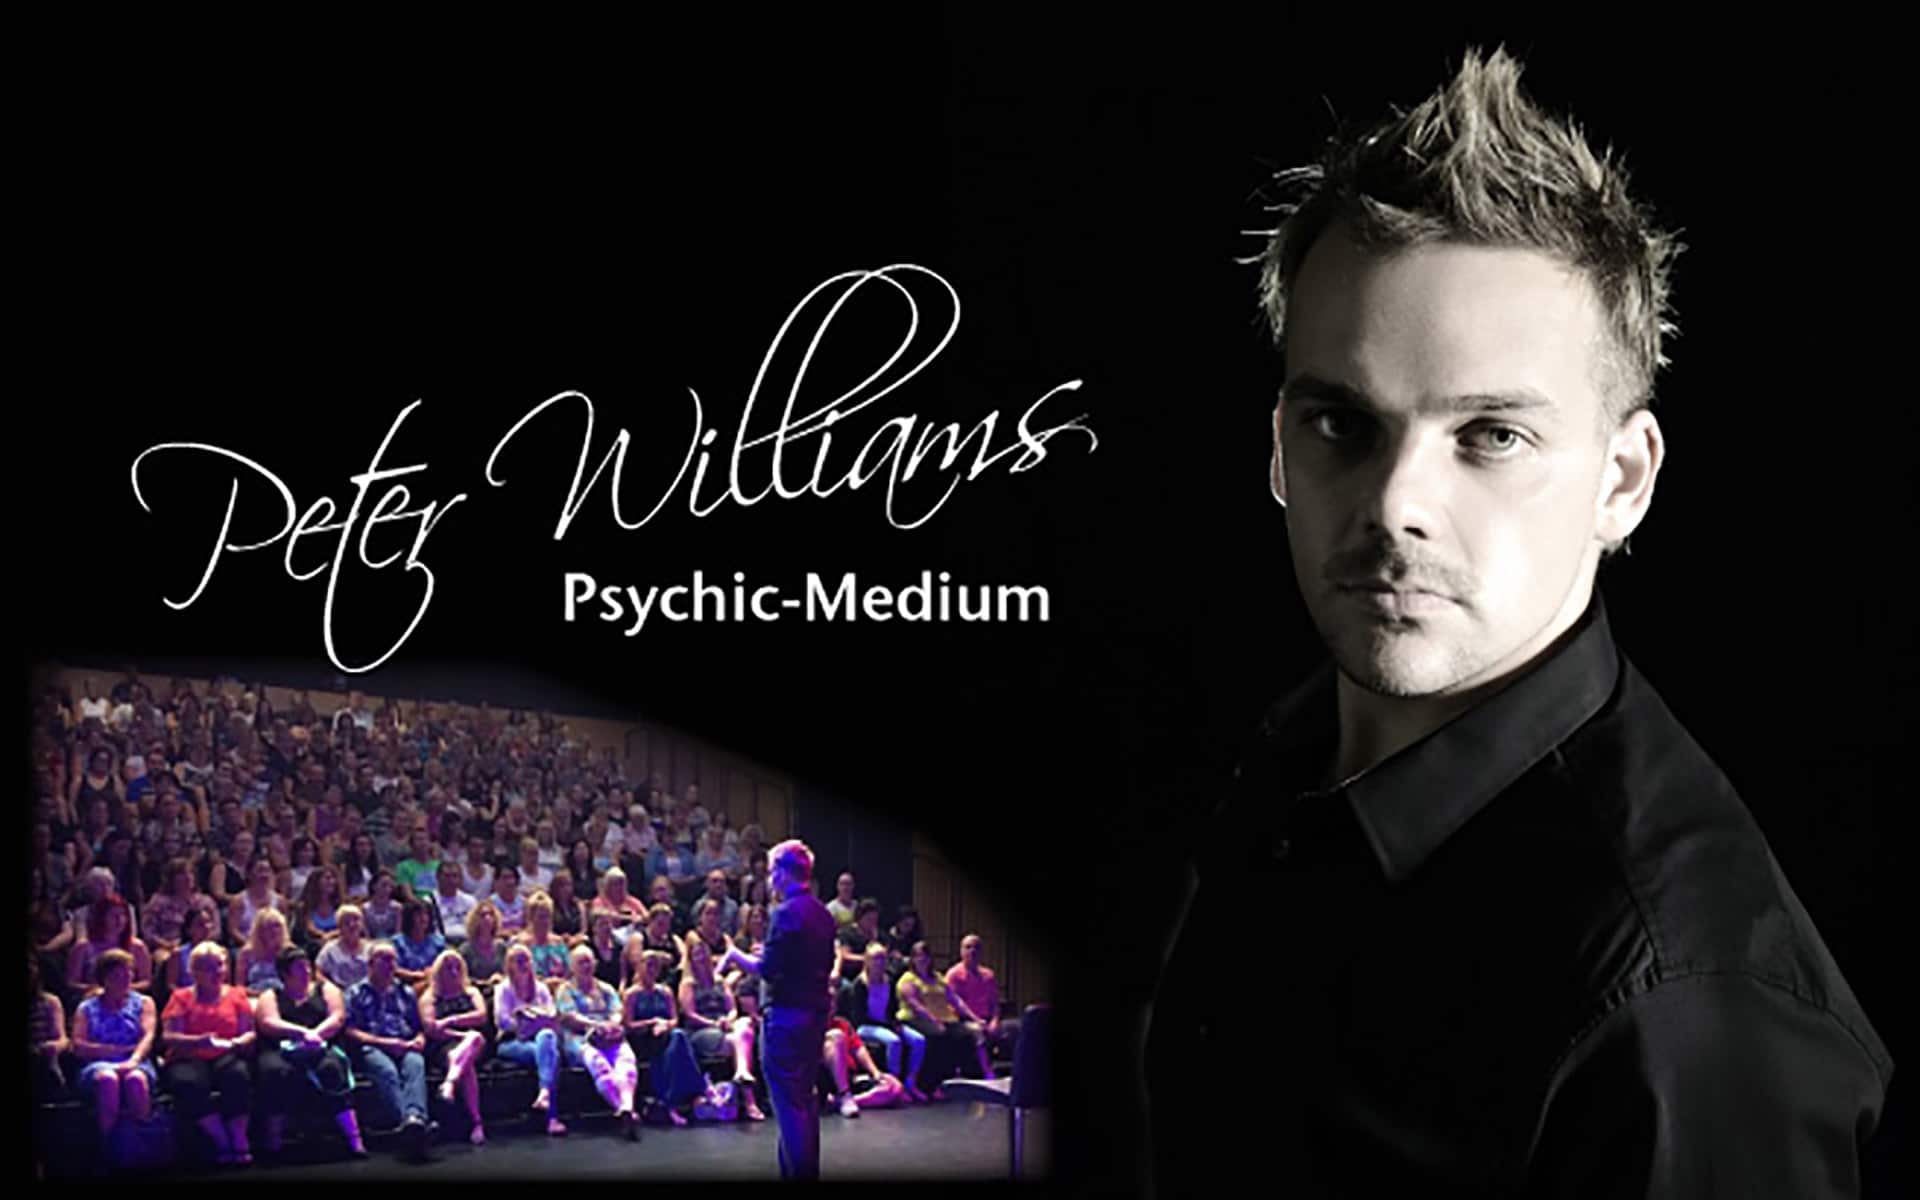 Photo of the Peter Williams, a psychic-medium, for his Studio 188 Ipswich Performance